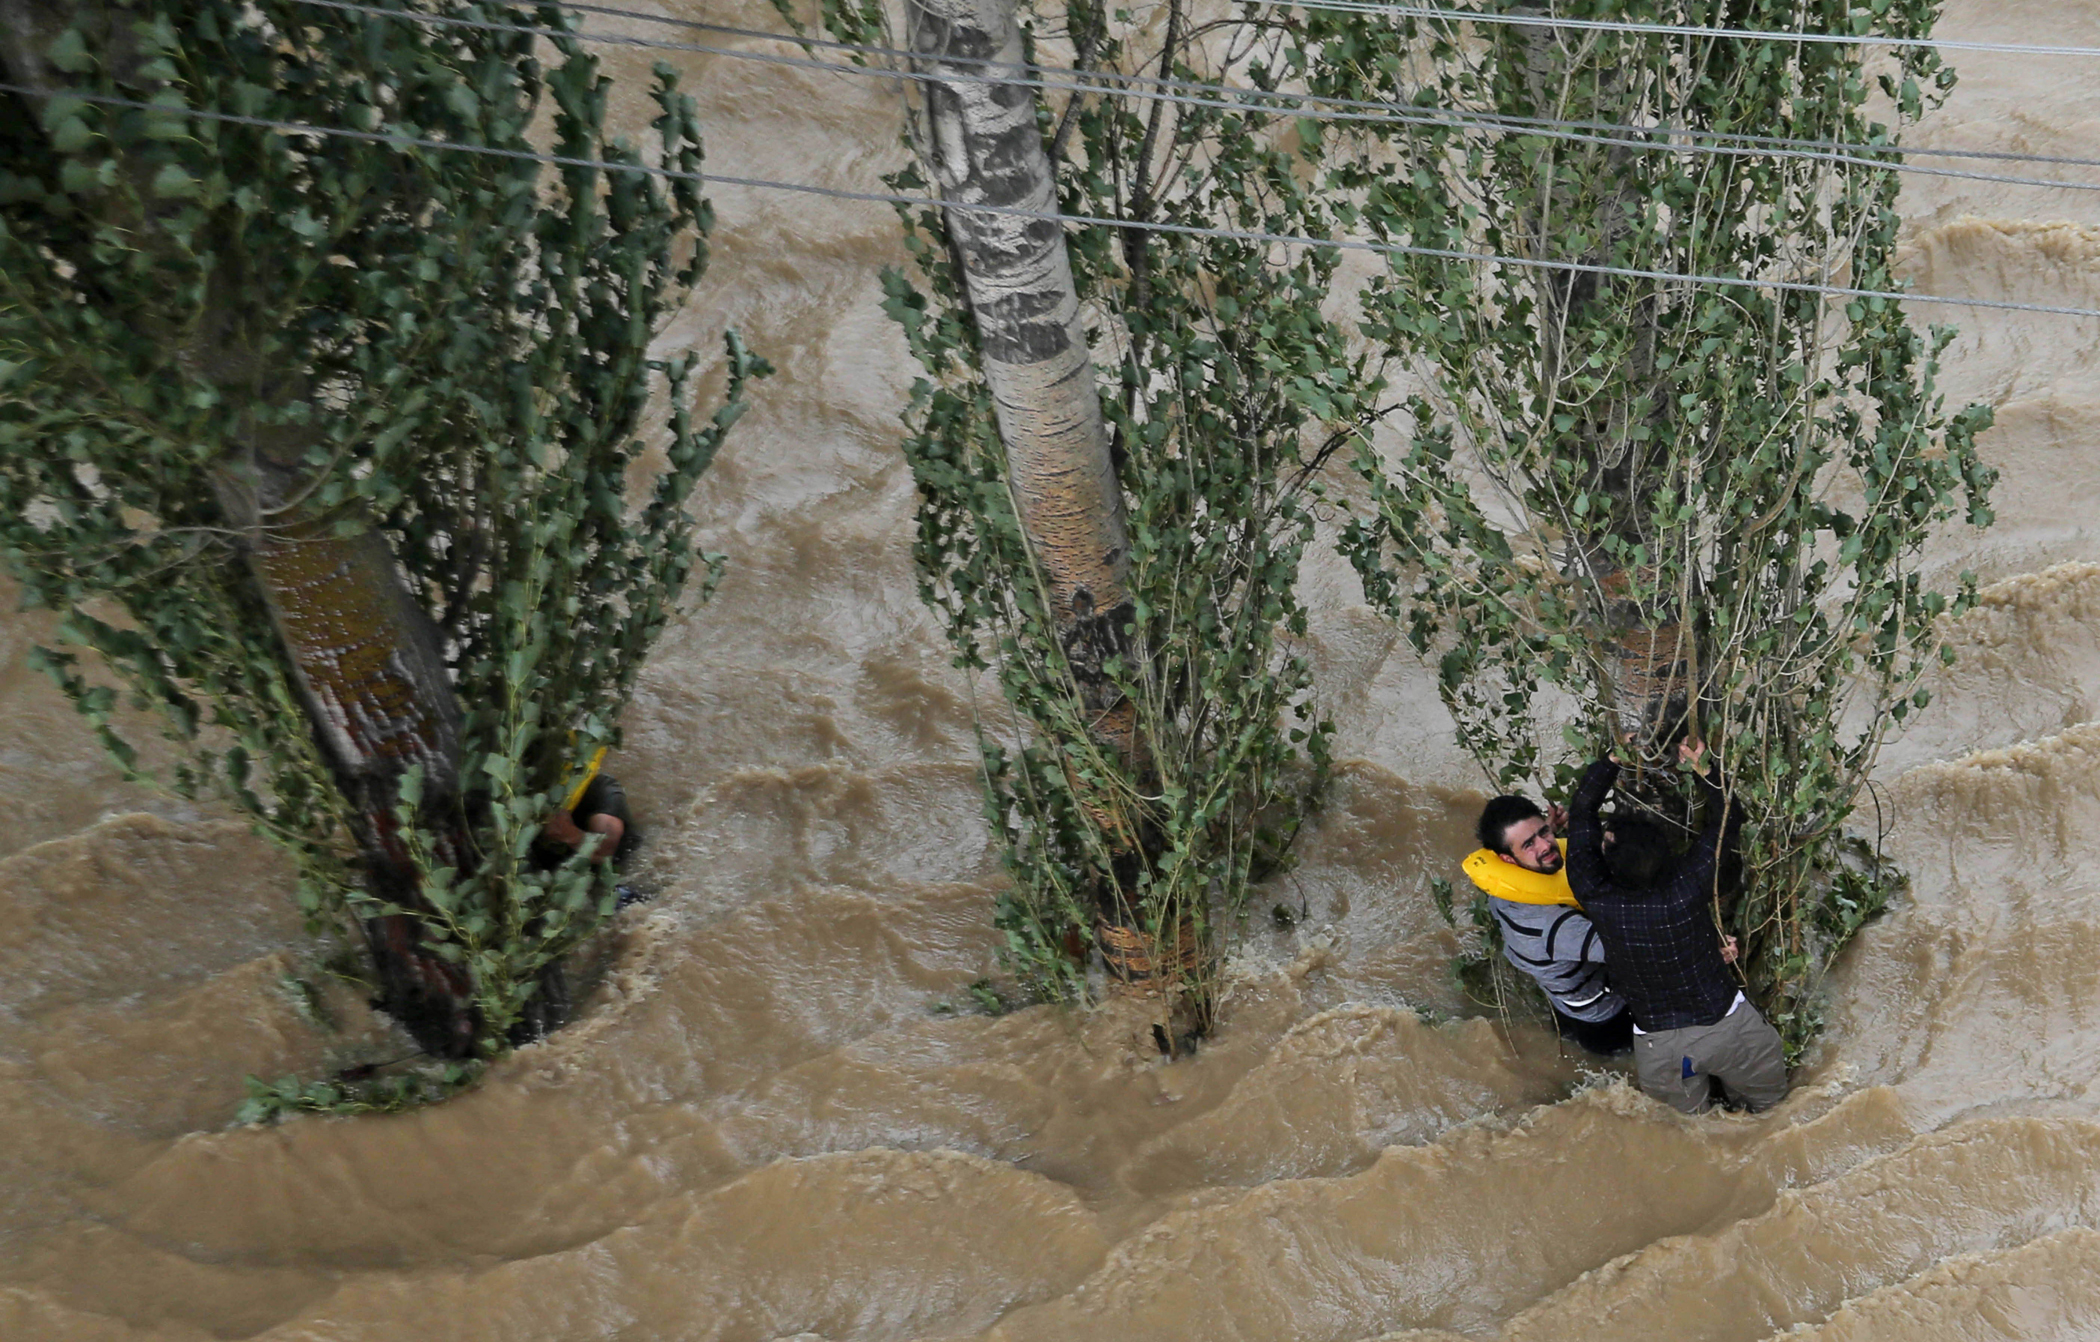 Kashmiris hang on to a tree to prevent being swept away by floodwaters in Srinagar, India, Sept. 9, 2014.